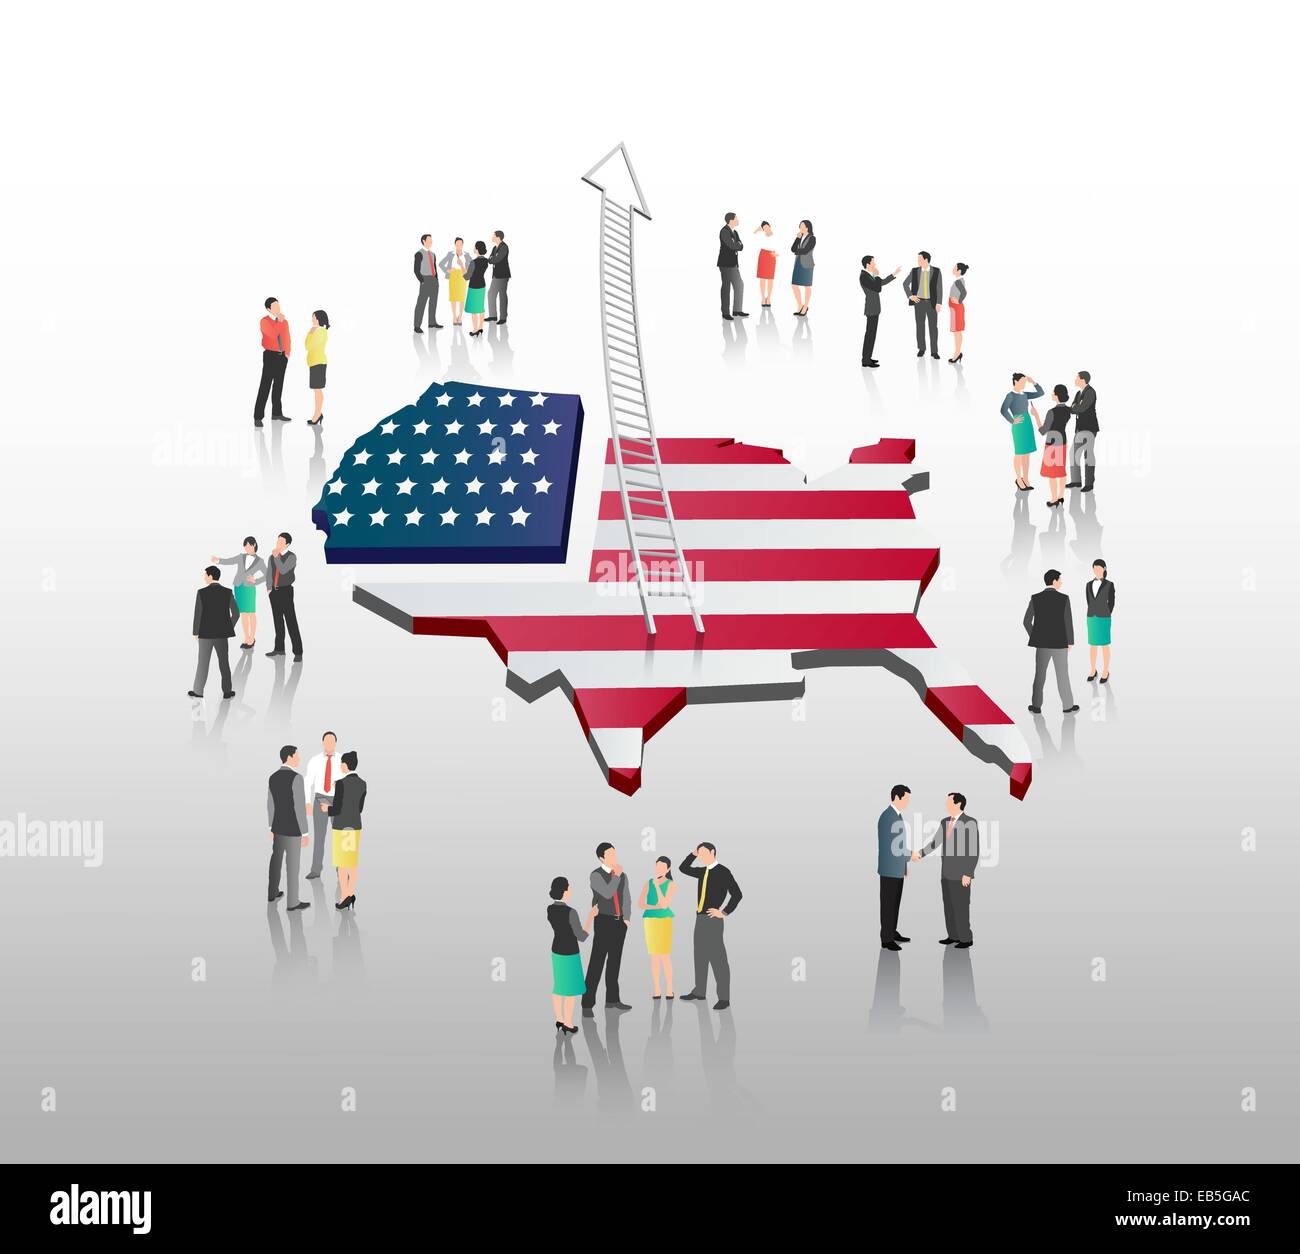 Business people standing with ladder arrow and american flag Stock Vector